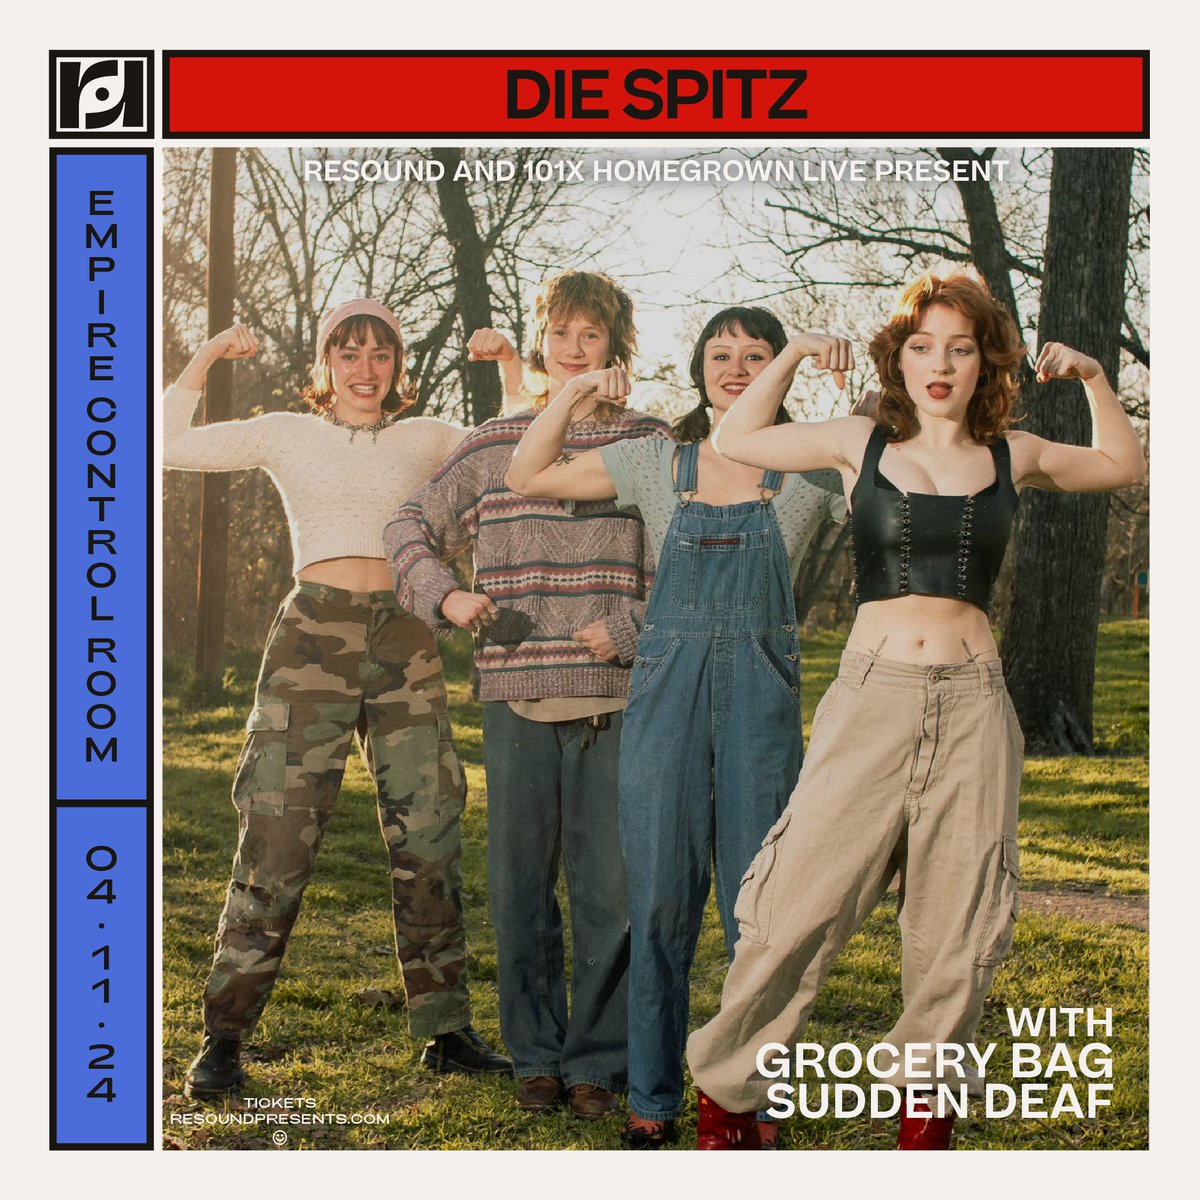 Let's hang at @EmpireATX tonight for this month's @101x Homegrown Live! It's @DieSpitz's single release show with @_suddendeaf_ and @grocerybagtx. 🎟️ cutt.ly/hw3Q9HWq